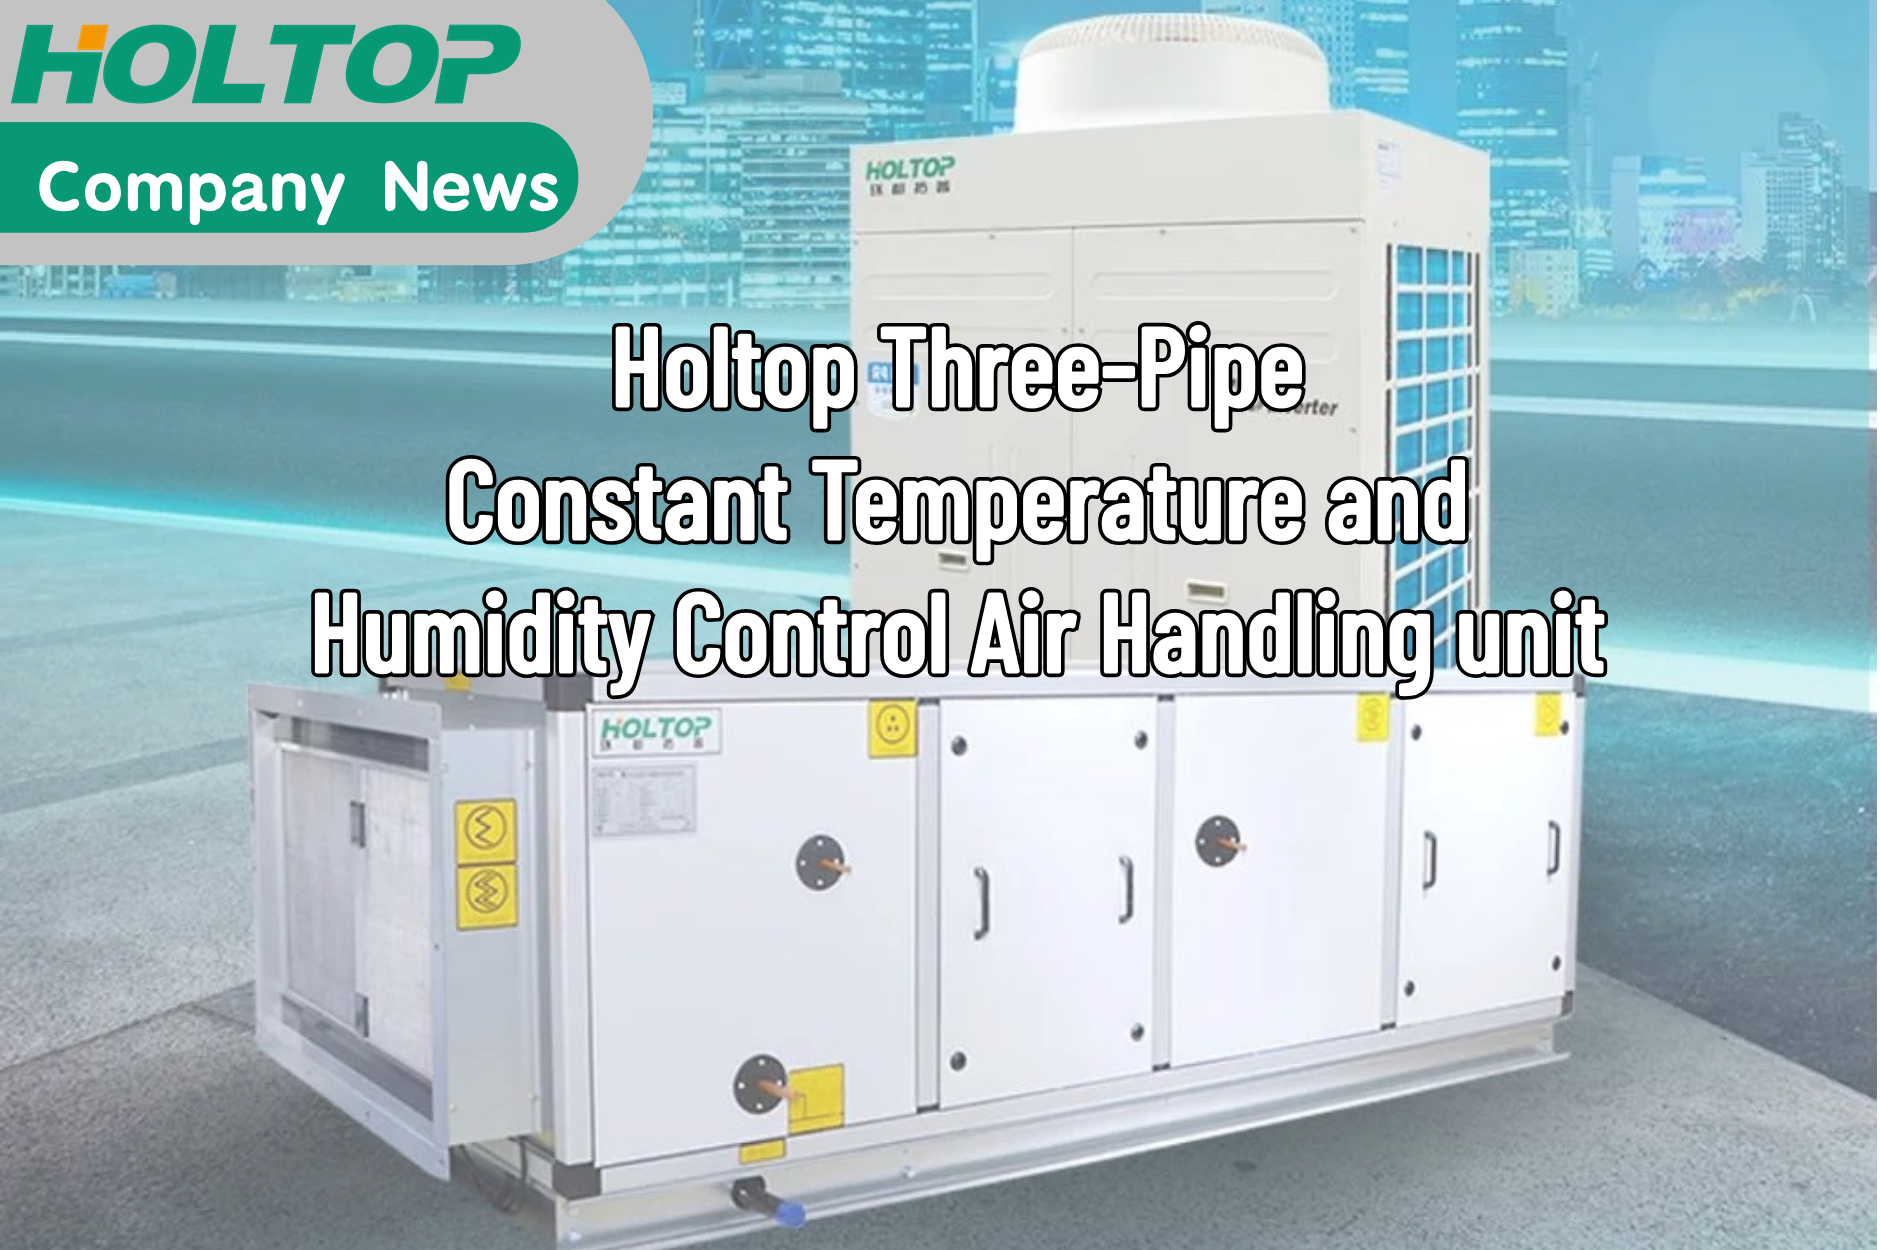 HOLTOP Three-Pipe Constant Temperature and Humidity Control Air Handling unit